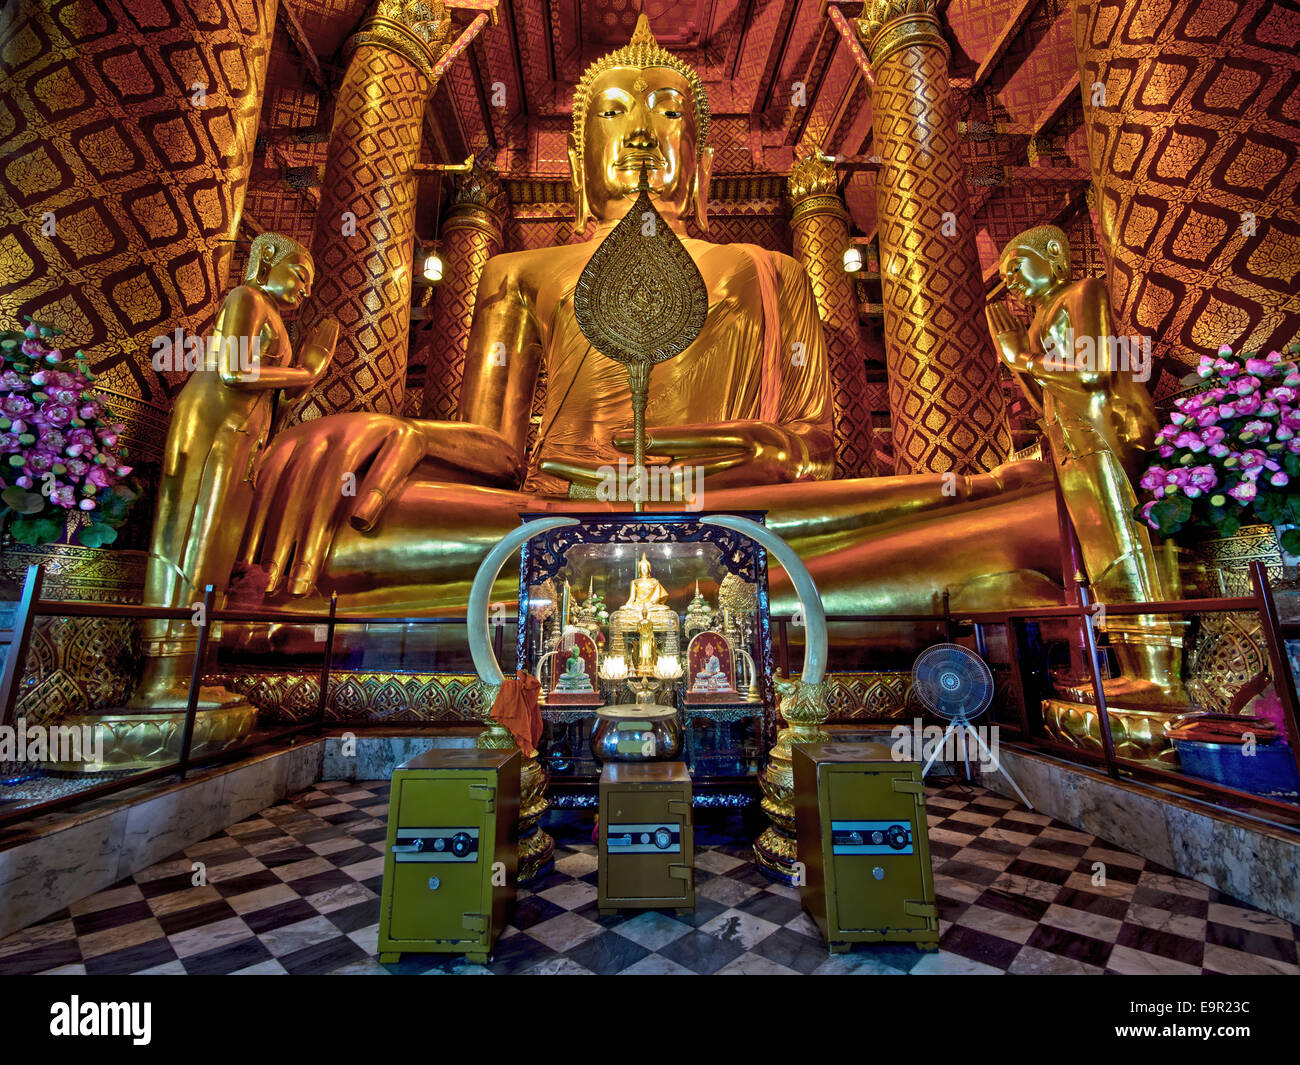 The 14th Century Buddha statue at Wat Phanan Choeng temple in Ayutthaya, the former capital of Thailand. Stock Photo